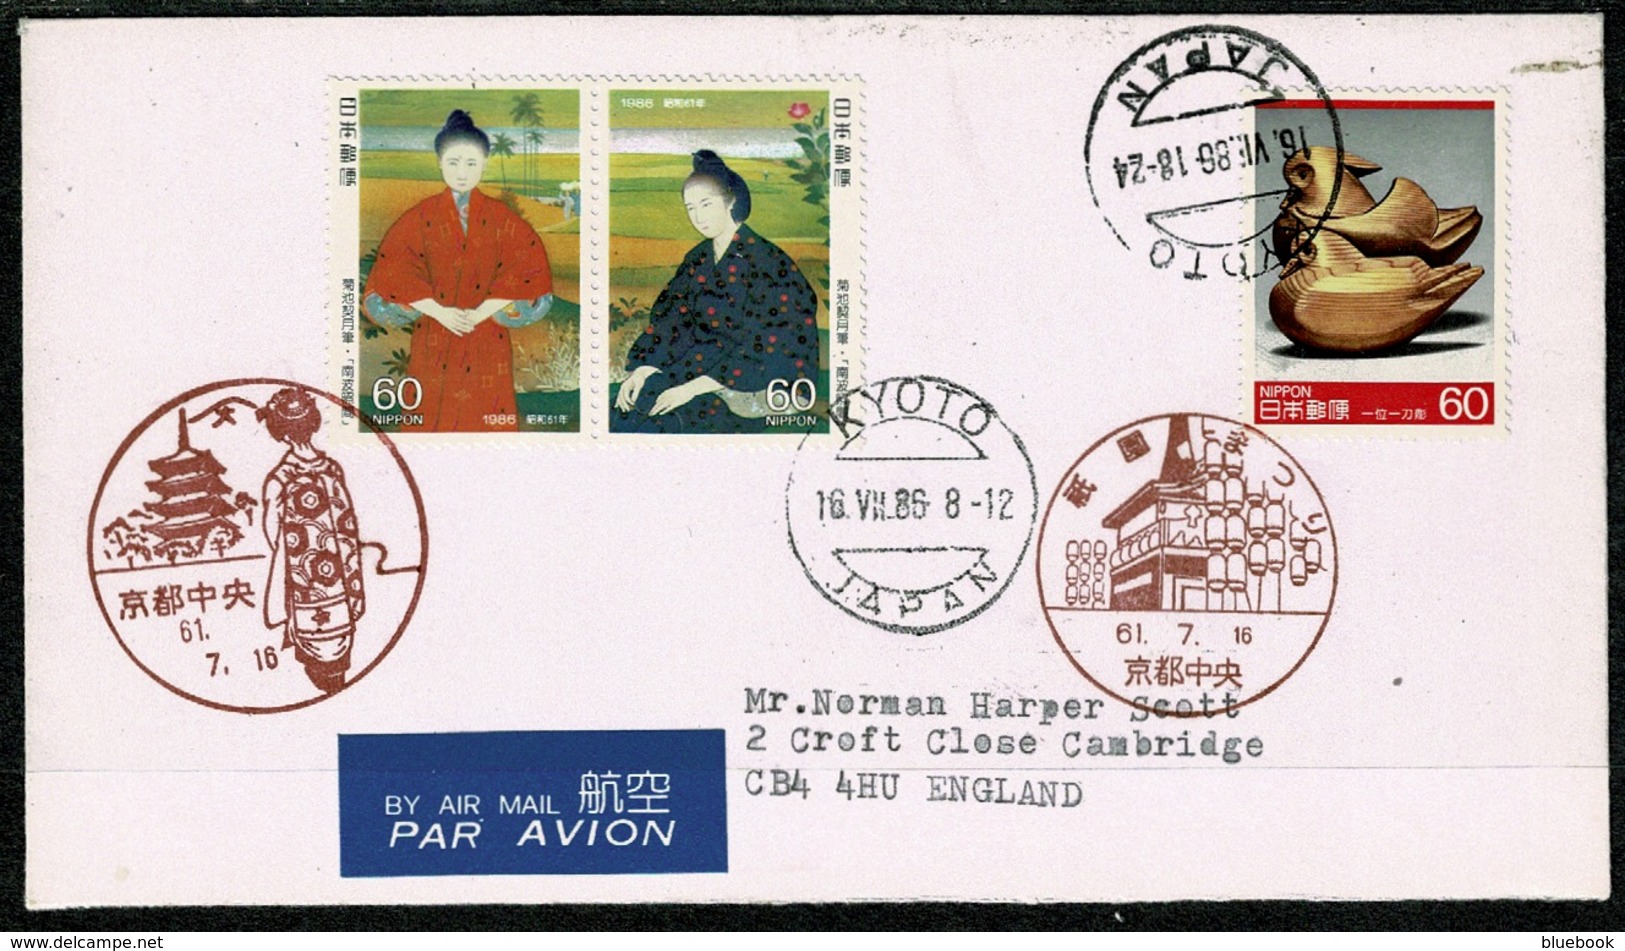 Ref 1300 - 1986 Airmail Cover - Kyoto Japan 180y Rate To Cambridge With Cachets - Covers & Documents